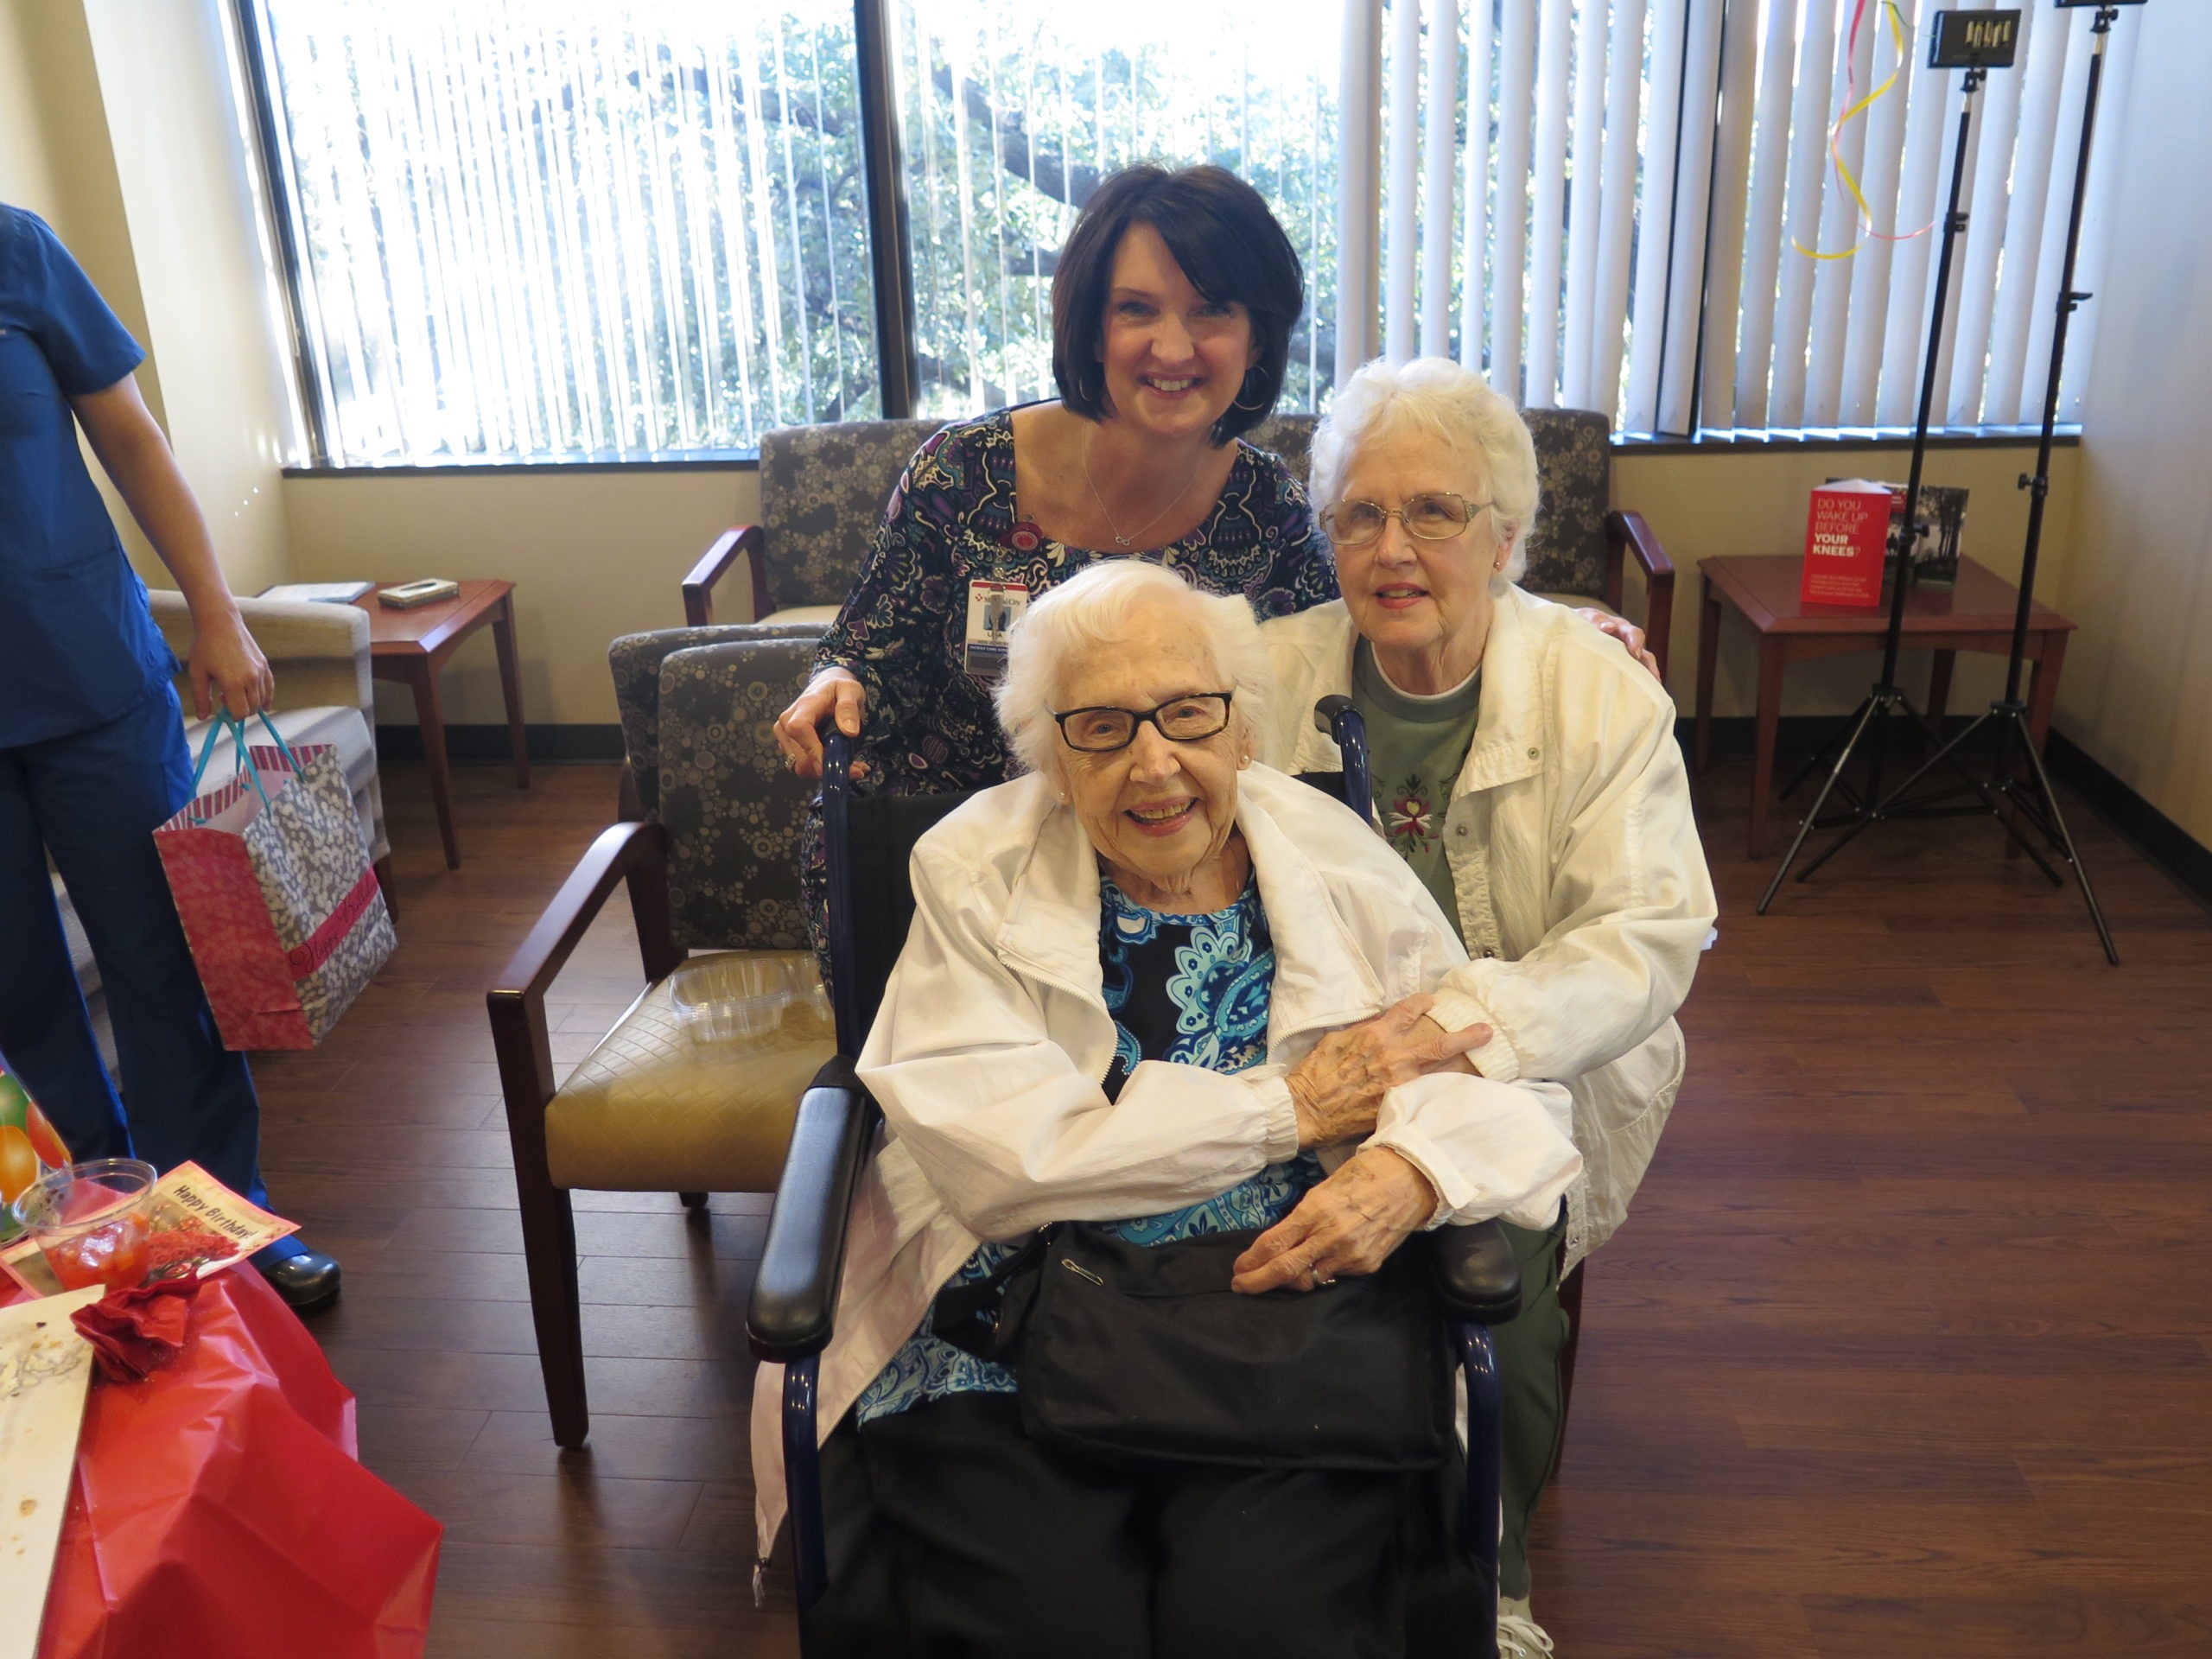 99-year-old patient posing for photo with family member and nurse